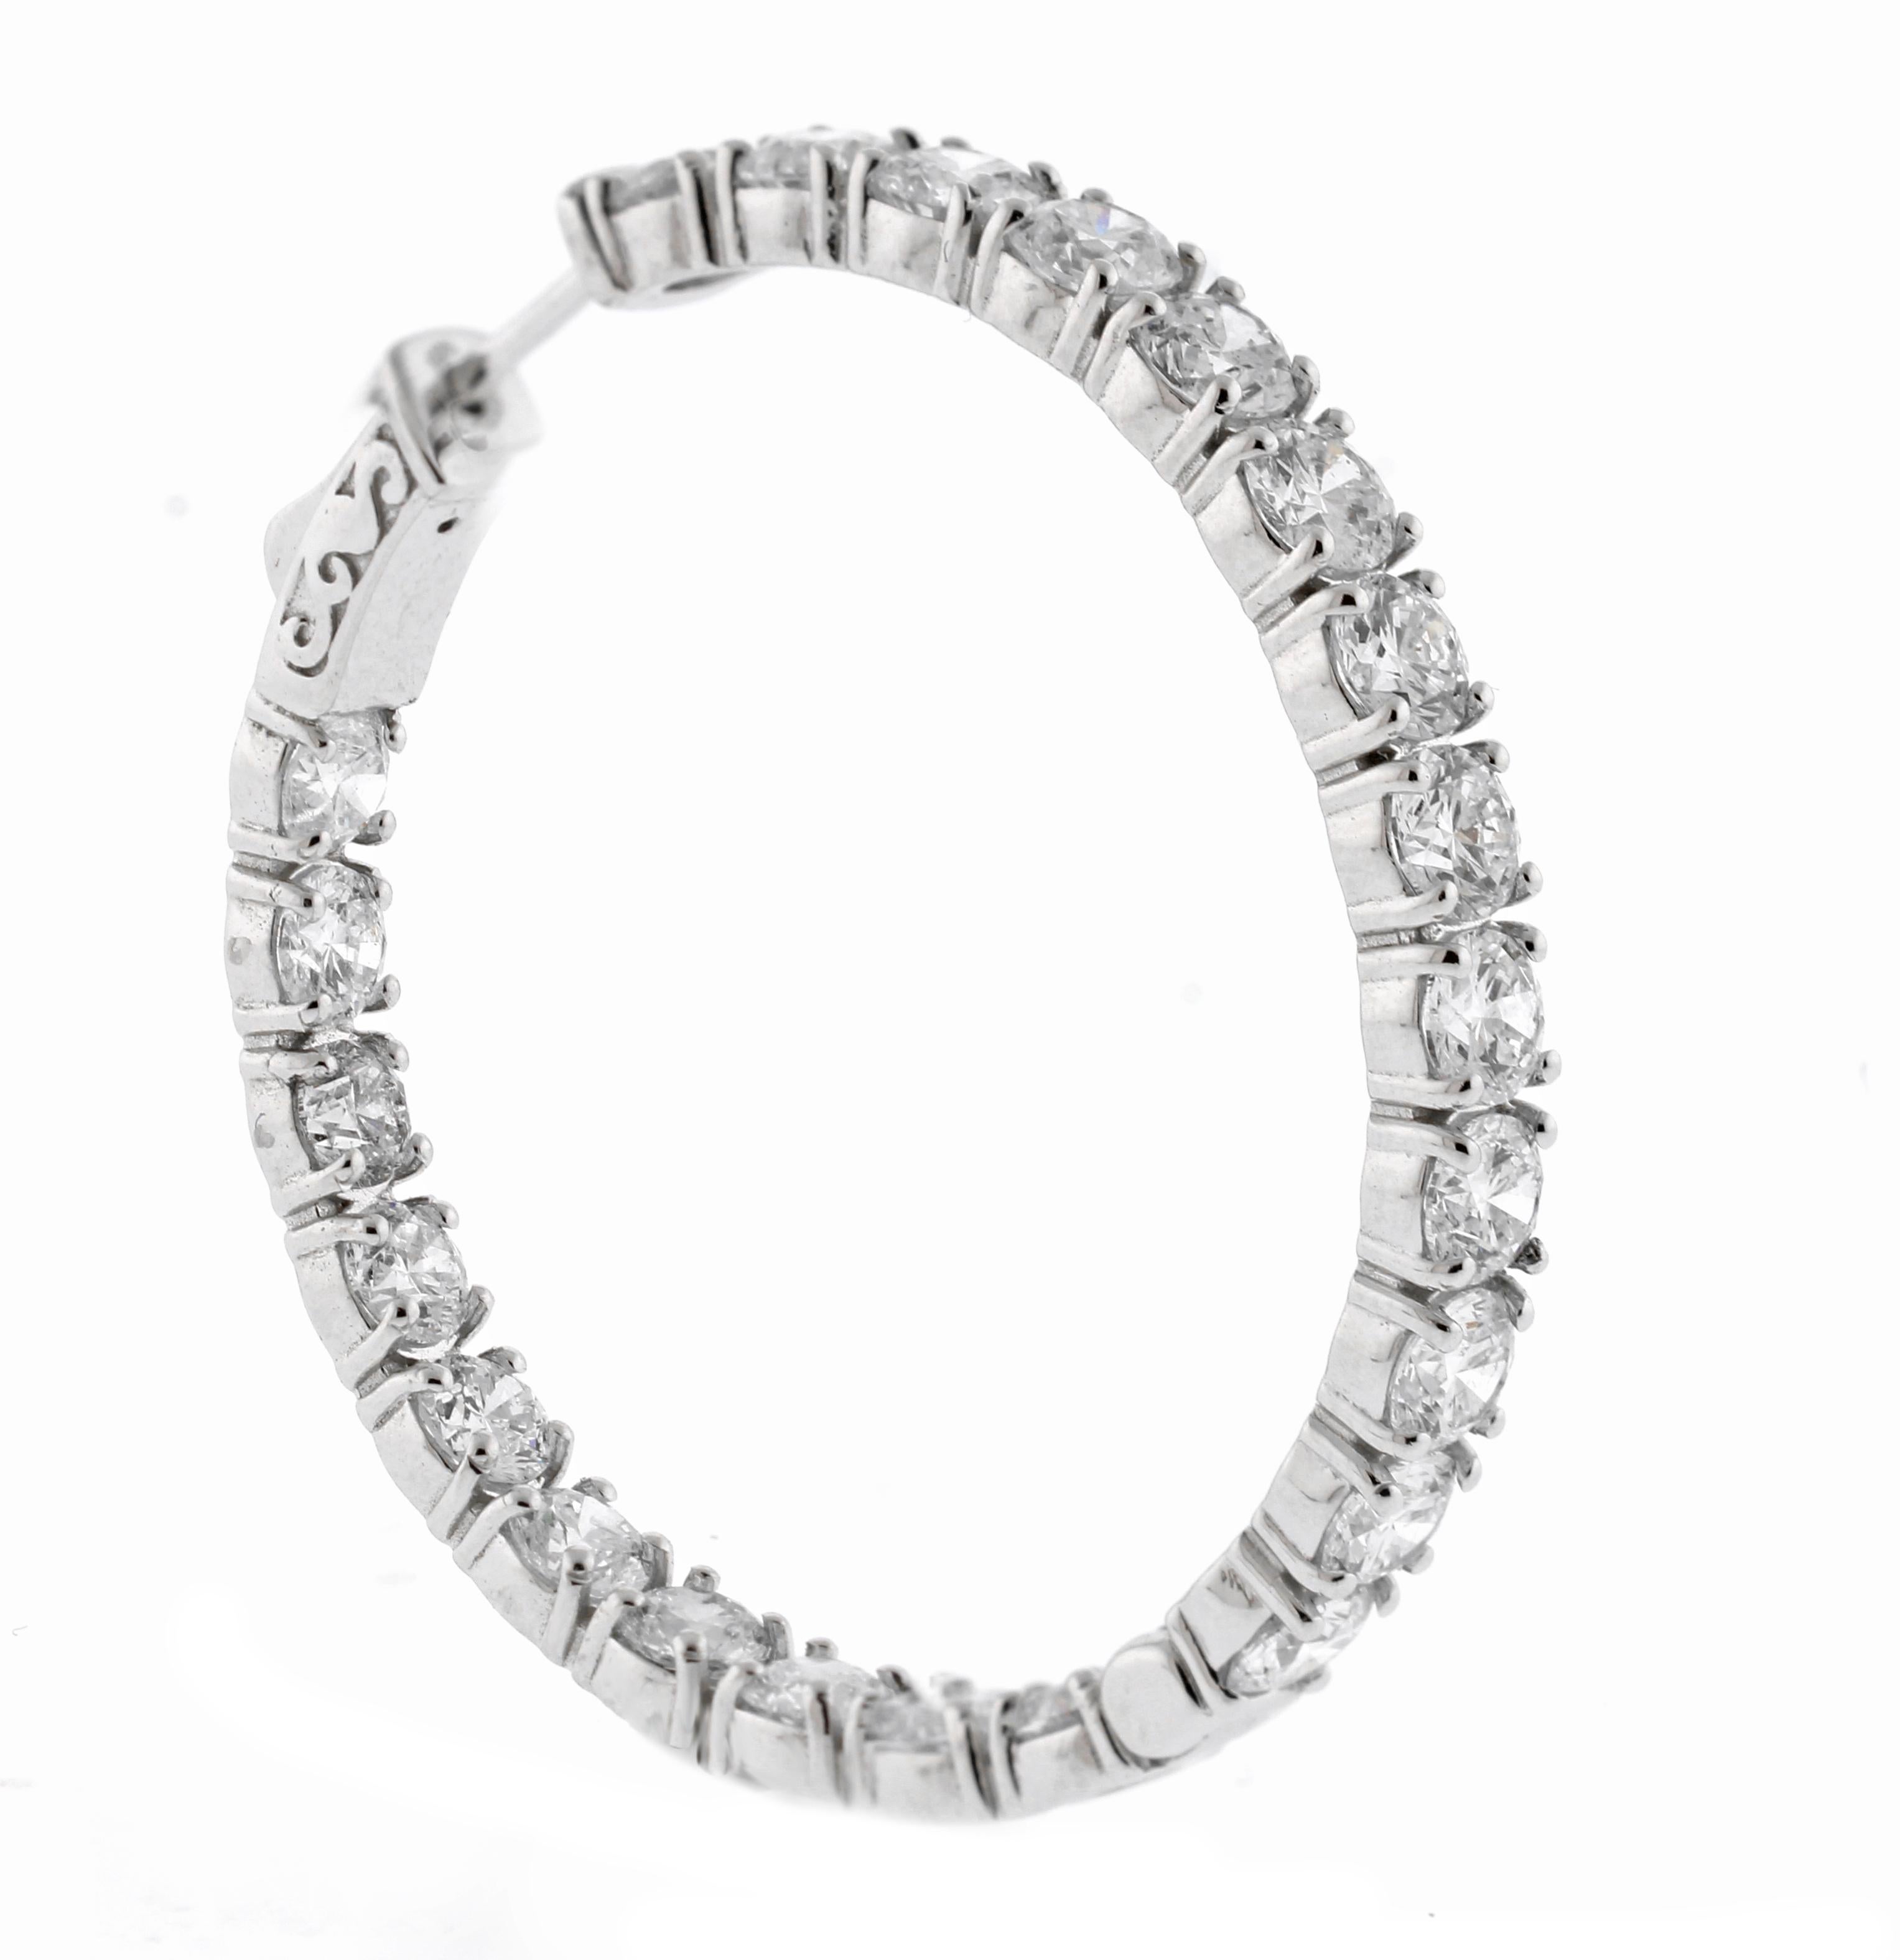 From Pampillonia jewelers, a pair in diamond hoop earrings. The full circle of diamonds are brilliant from any angle. 46 Diamonds weigh 11.13 carats, I color ad VS clarity. The earrings are a full 1 and 3/8th of an inch in diameter